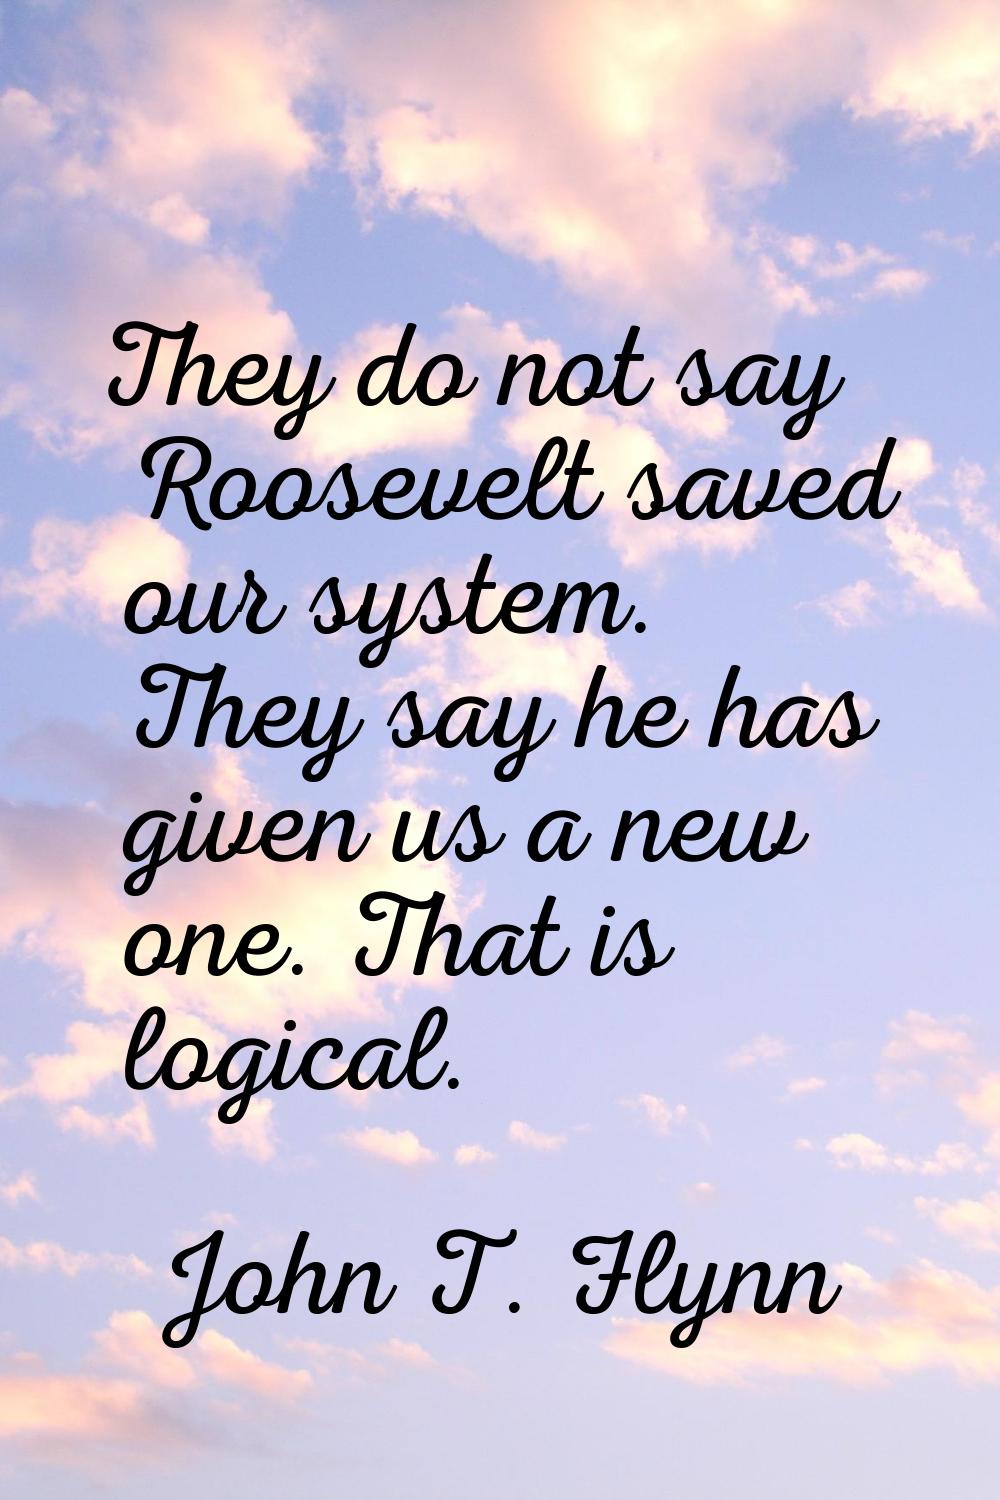 They do not say Roosevelt saved our system. They say he has given us a new one. That is logical.